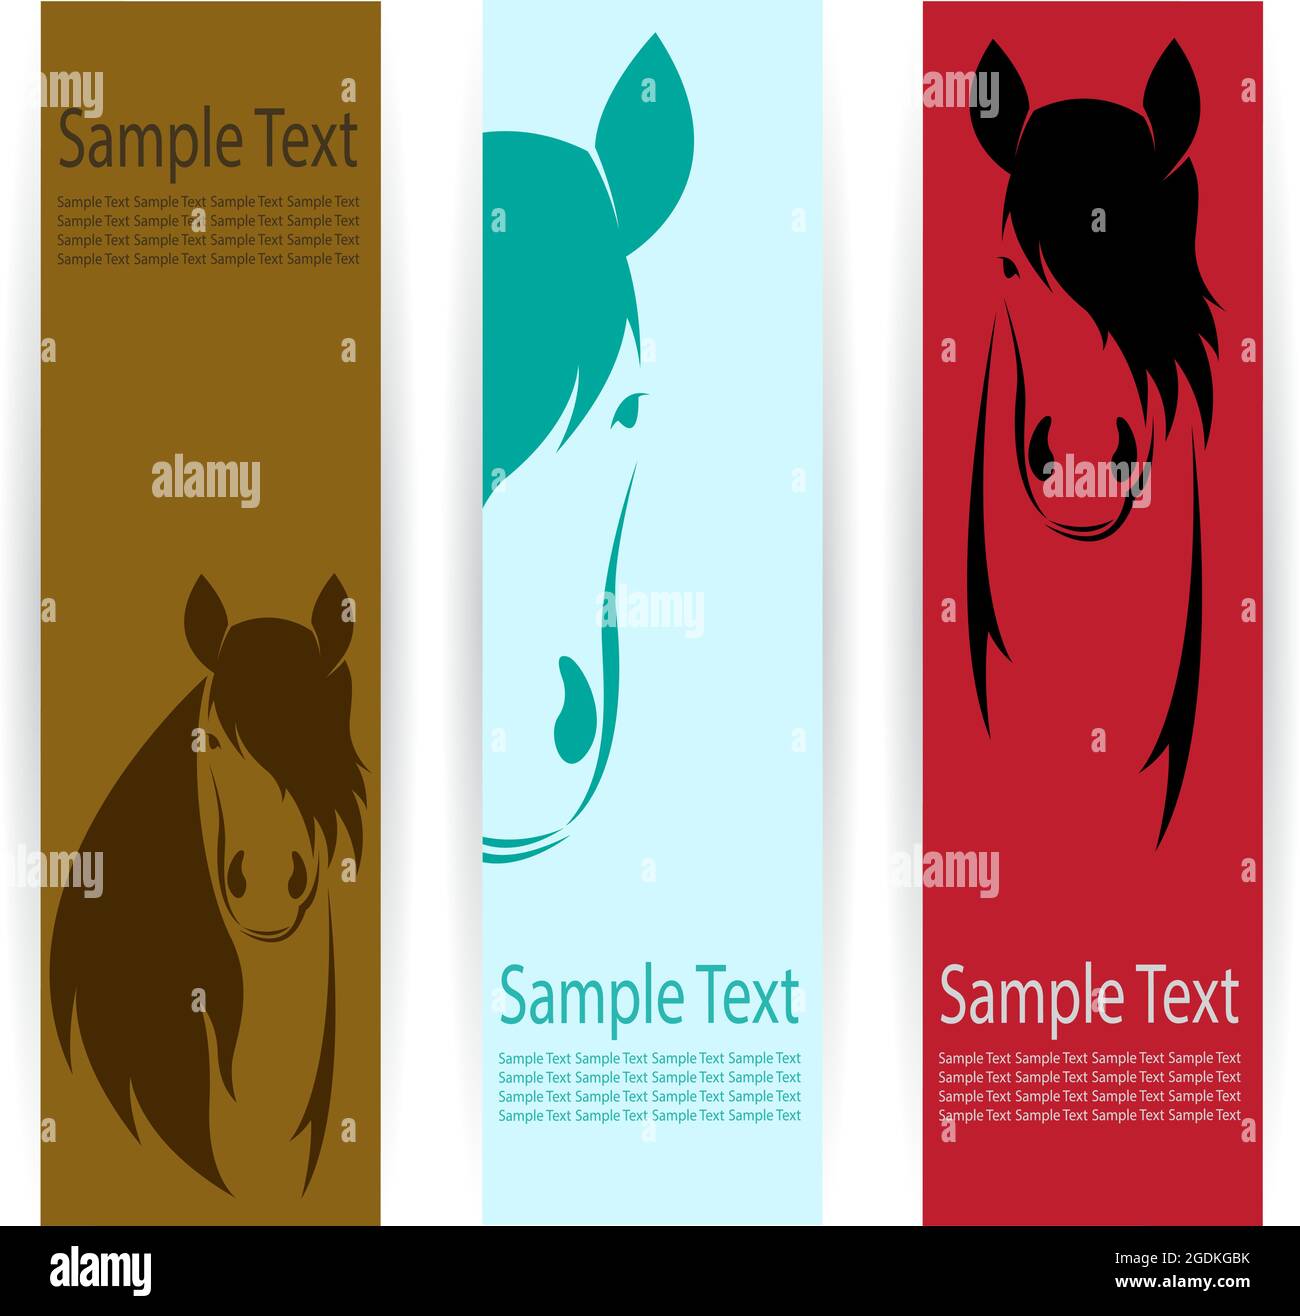 Vector image of an horse banners. Easy editable layered vector illustration. Wild Animals. Stock Vector